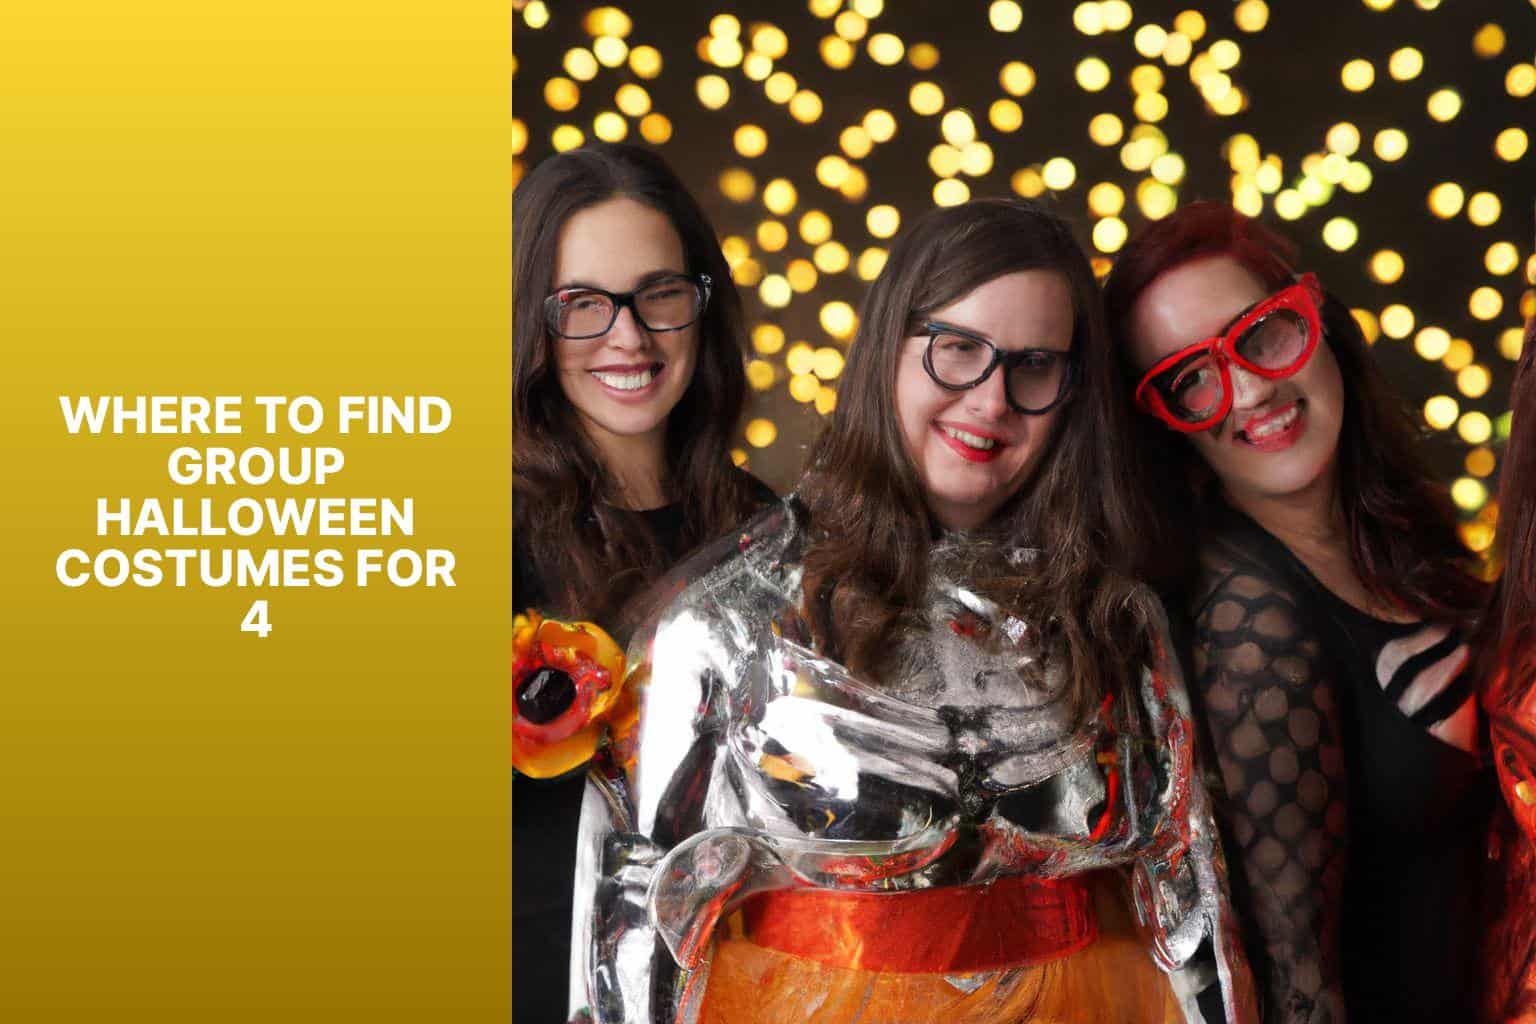 Where to Find Group Halloween Costumes for 4 - group halloween costumes for 4 